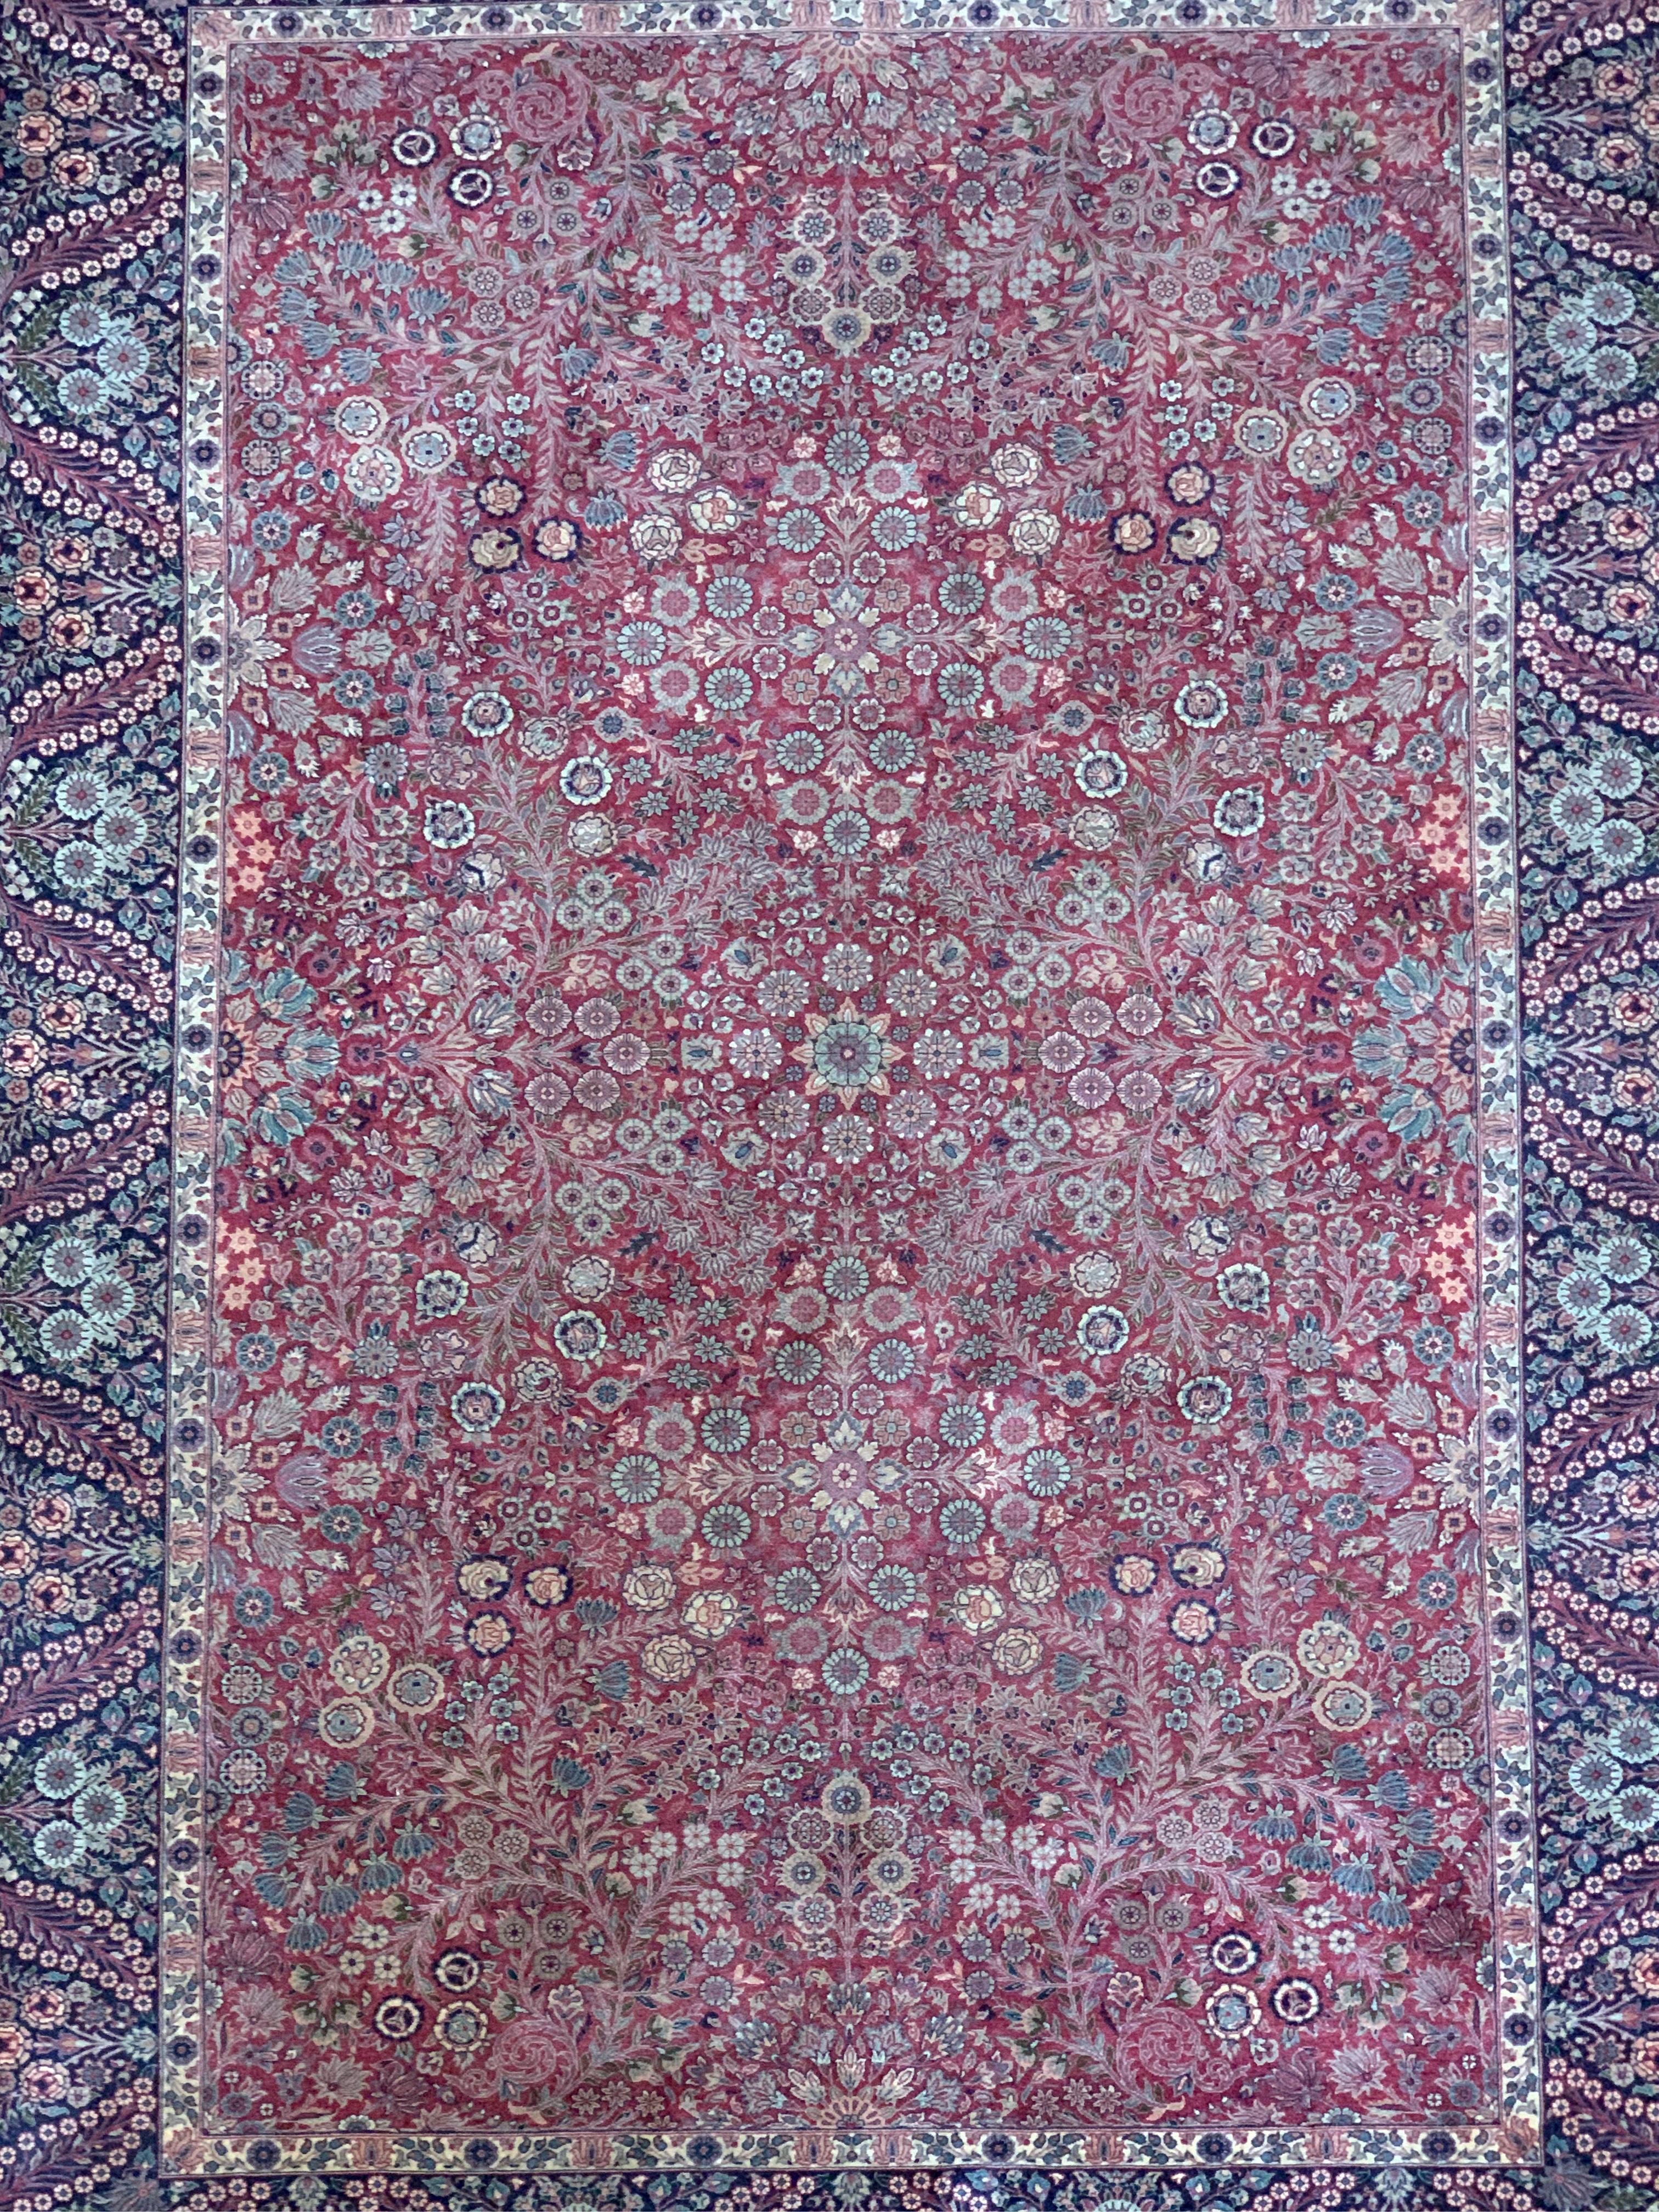 This is a vintage hand-knotted Persian Kashan rug, woven in Kashan, Iran circa 1980s. Mohtasham is the design style. The rug is signed, and is wool knot on cotton warp and weft, and is approximately 4’7 x 7’4 ft, with an extremely Fine weave,